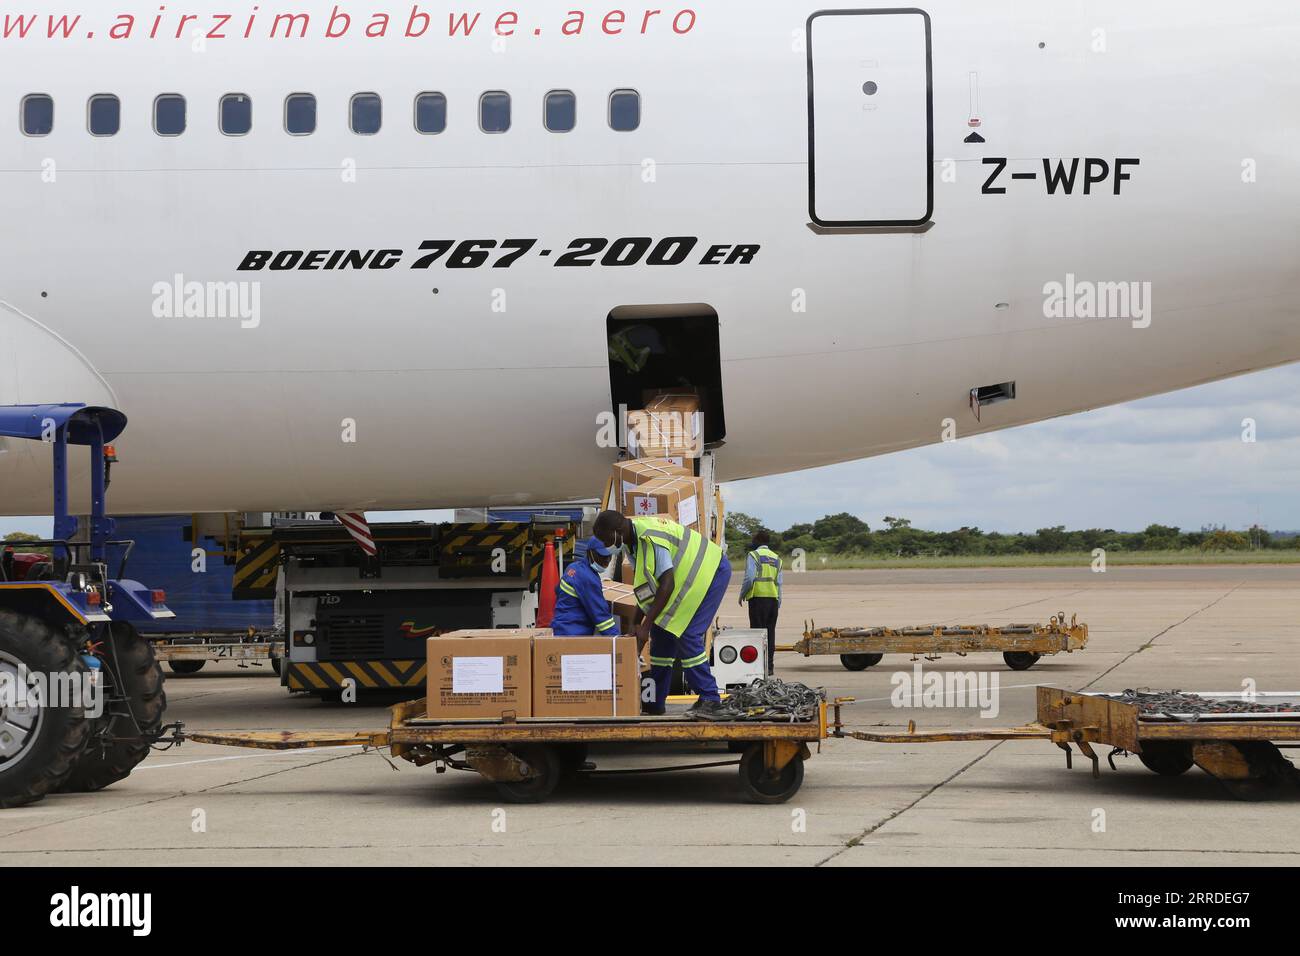 211220 -- HARARE, Dec. 20, 2021 -- Workers unload medical supplies donated by China at Robert Gabriel Mugabe International Airport in Harare, Zimbabwe, on Dec. 20, 2021. Zimbabwe on Monday received a batch of Sinovac COVID-19 vaccine donated by China, which will boost the country s vaccination campaign as it battles the fourth wave of COVID-19 pandemic.  ZIMBABWE-HARARE-CHINA-COVID-19 VACCINE-MEDICAL SUPPLIES-DONATION ZhangxYuliang PUBLICATIONxNOTxINxCHN Stock Photo